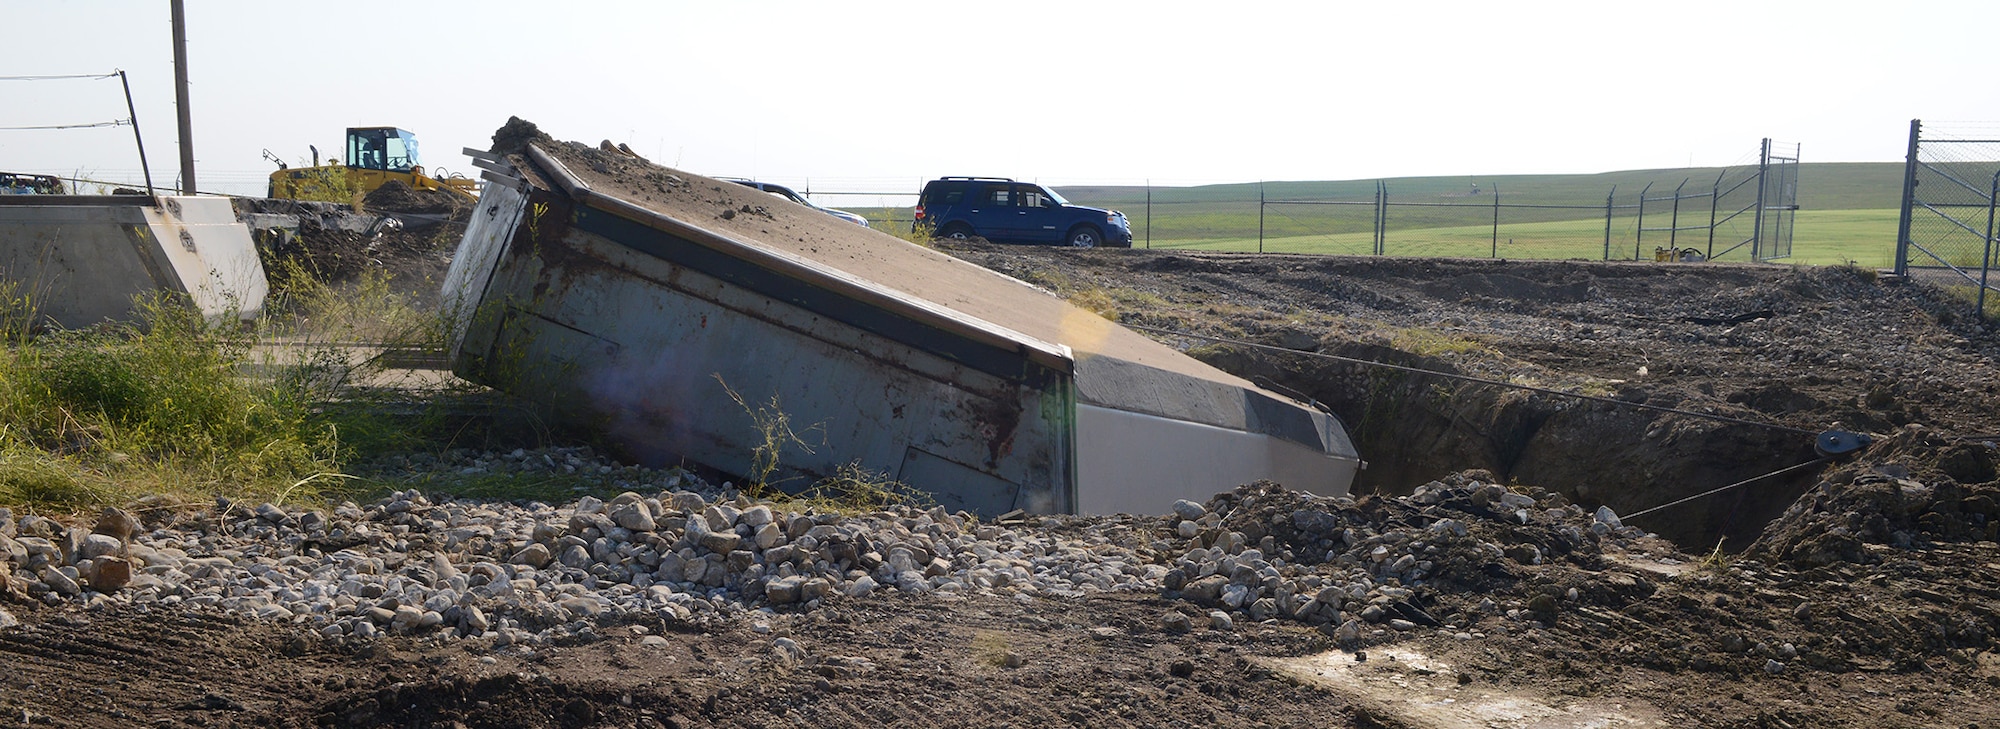 The 110-ton launcher-closure door at Launch Facility T-49 is pulled off its rails into a hole August 5, 2014. The site is the last of 50 Minuteman III missile launch silos once operated by the 564th Missile Squadron that are being eliminated from Malmstrom Air Force Base, Mont., in compliance with the New Strategic Arms Reduction Treaty. (Air Force photo/Senior Airman Katrina Heikkinen)